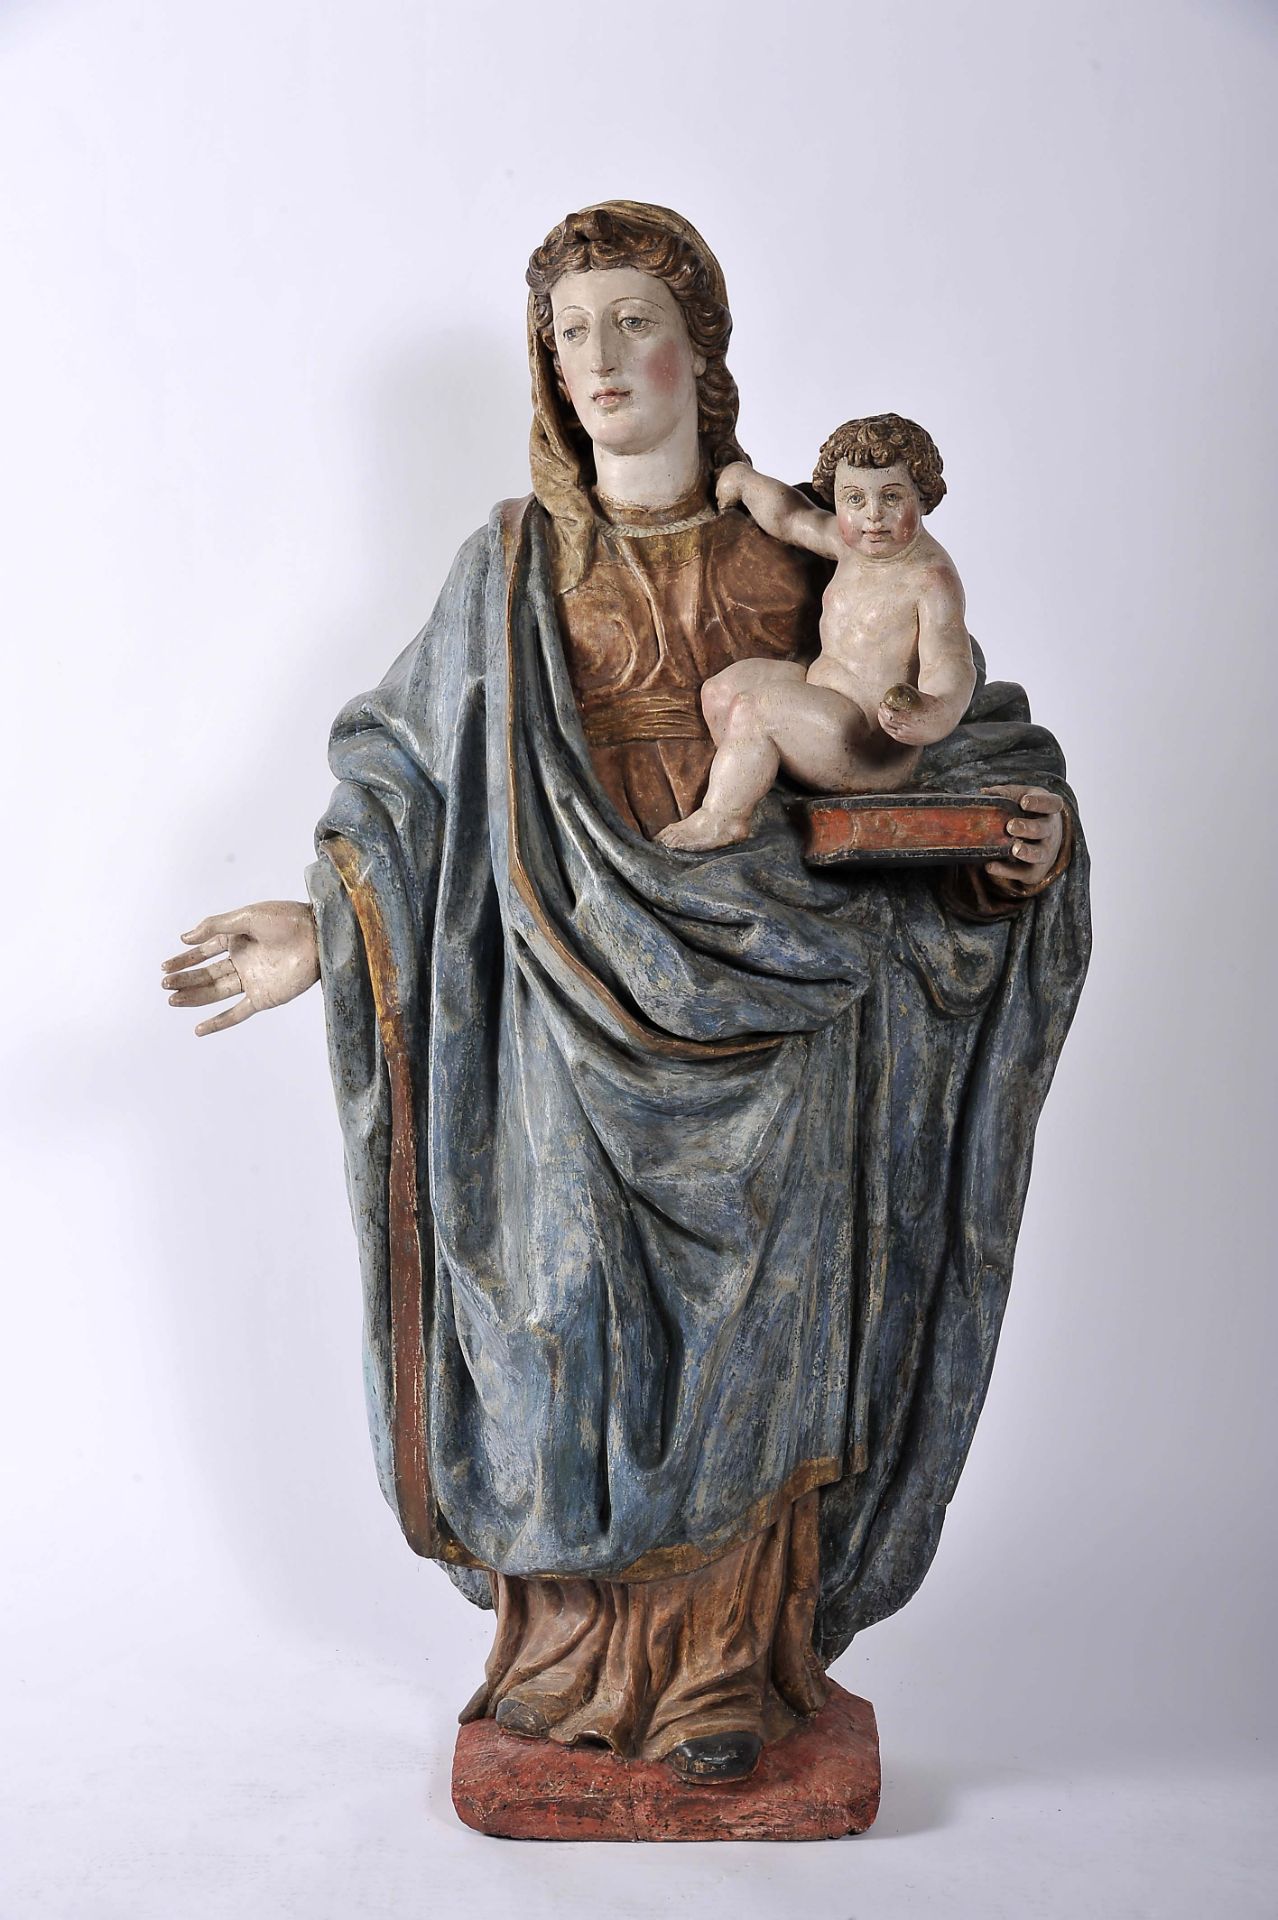 Our Lady with the Child Jesus